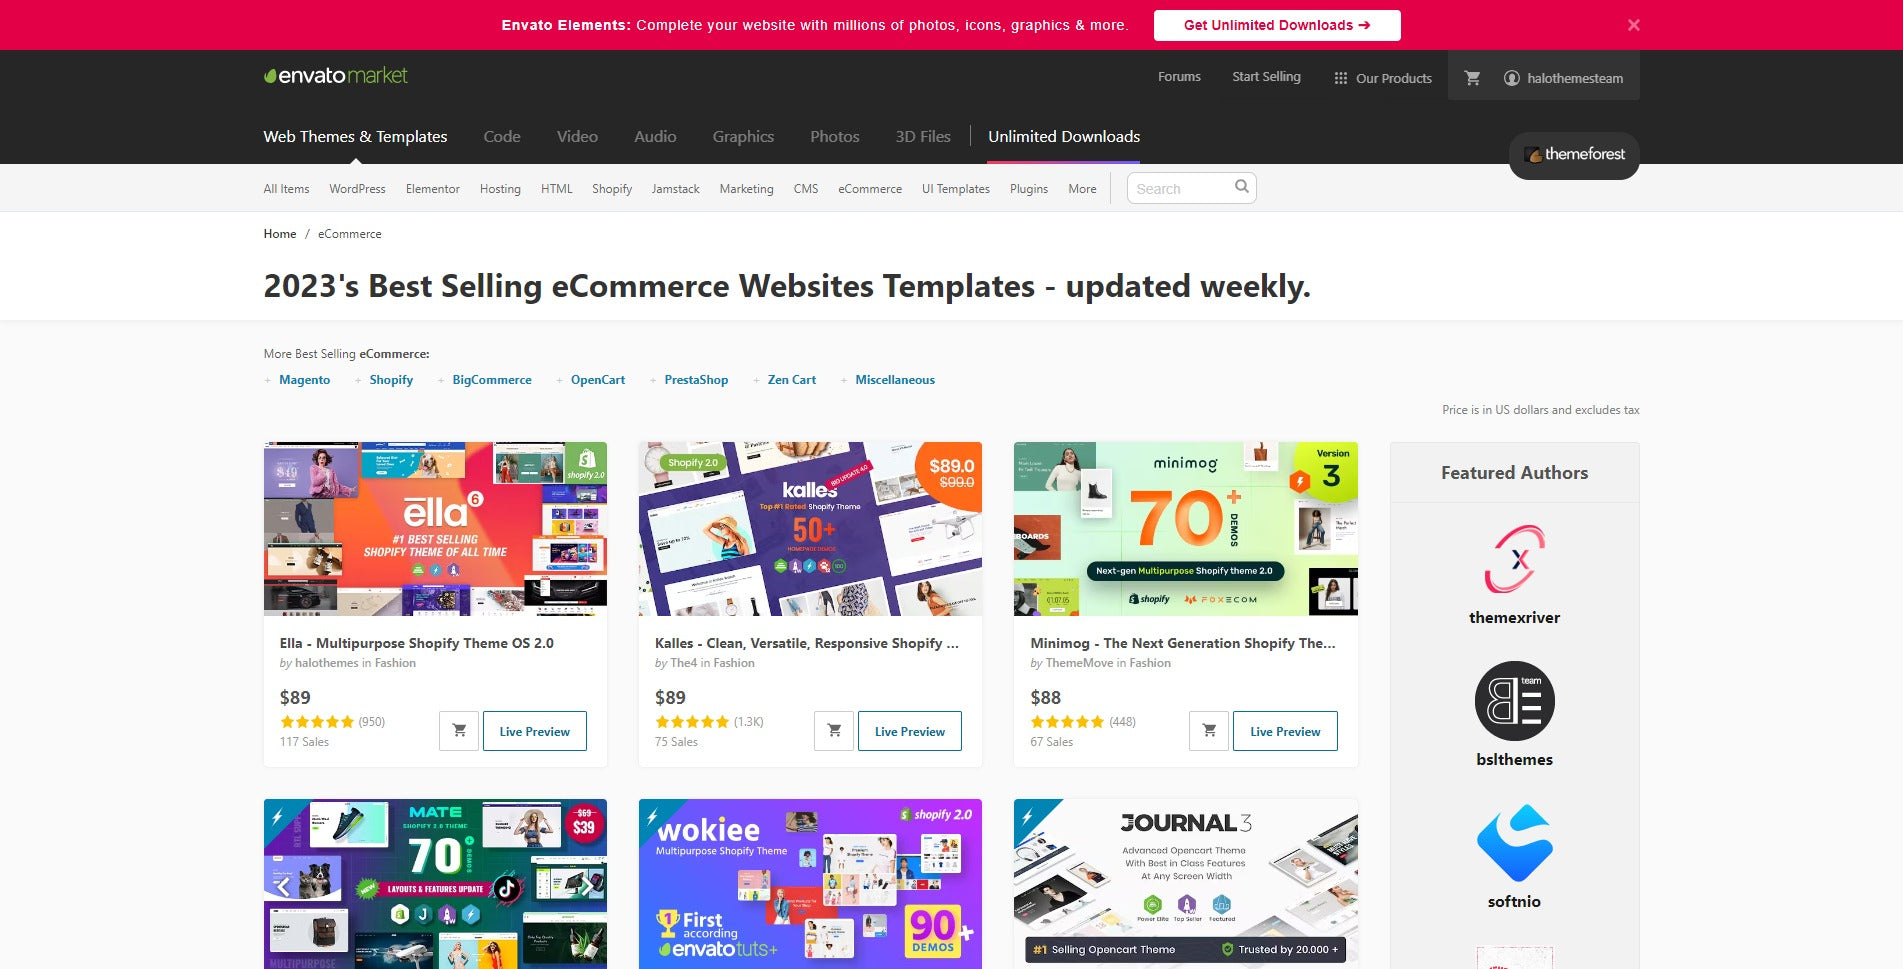 2023's Best Selling eCommerce Websites Templates